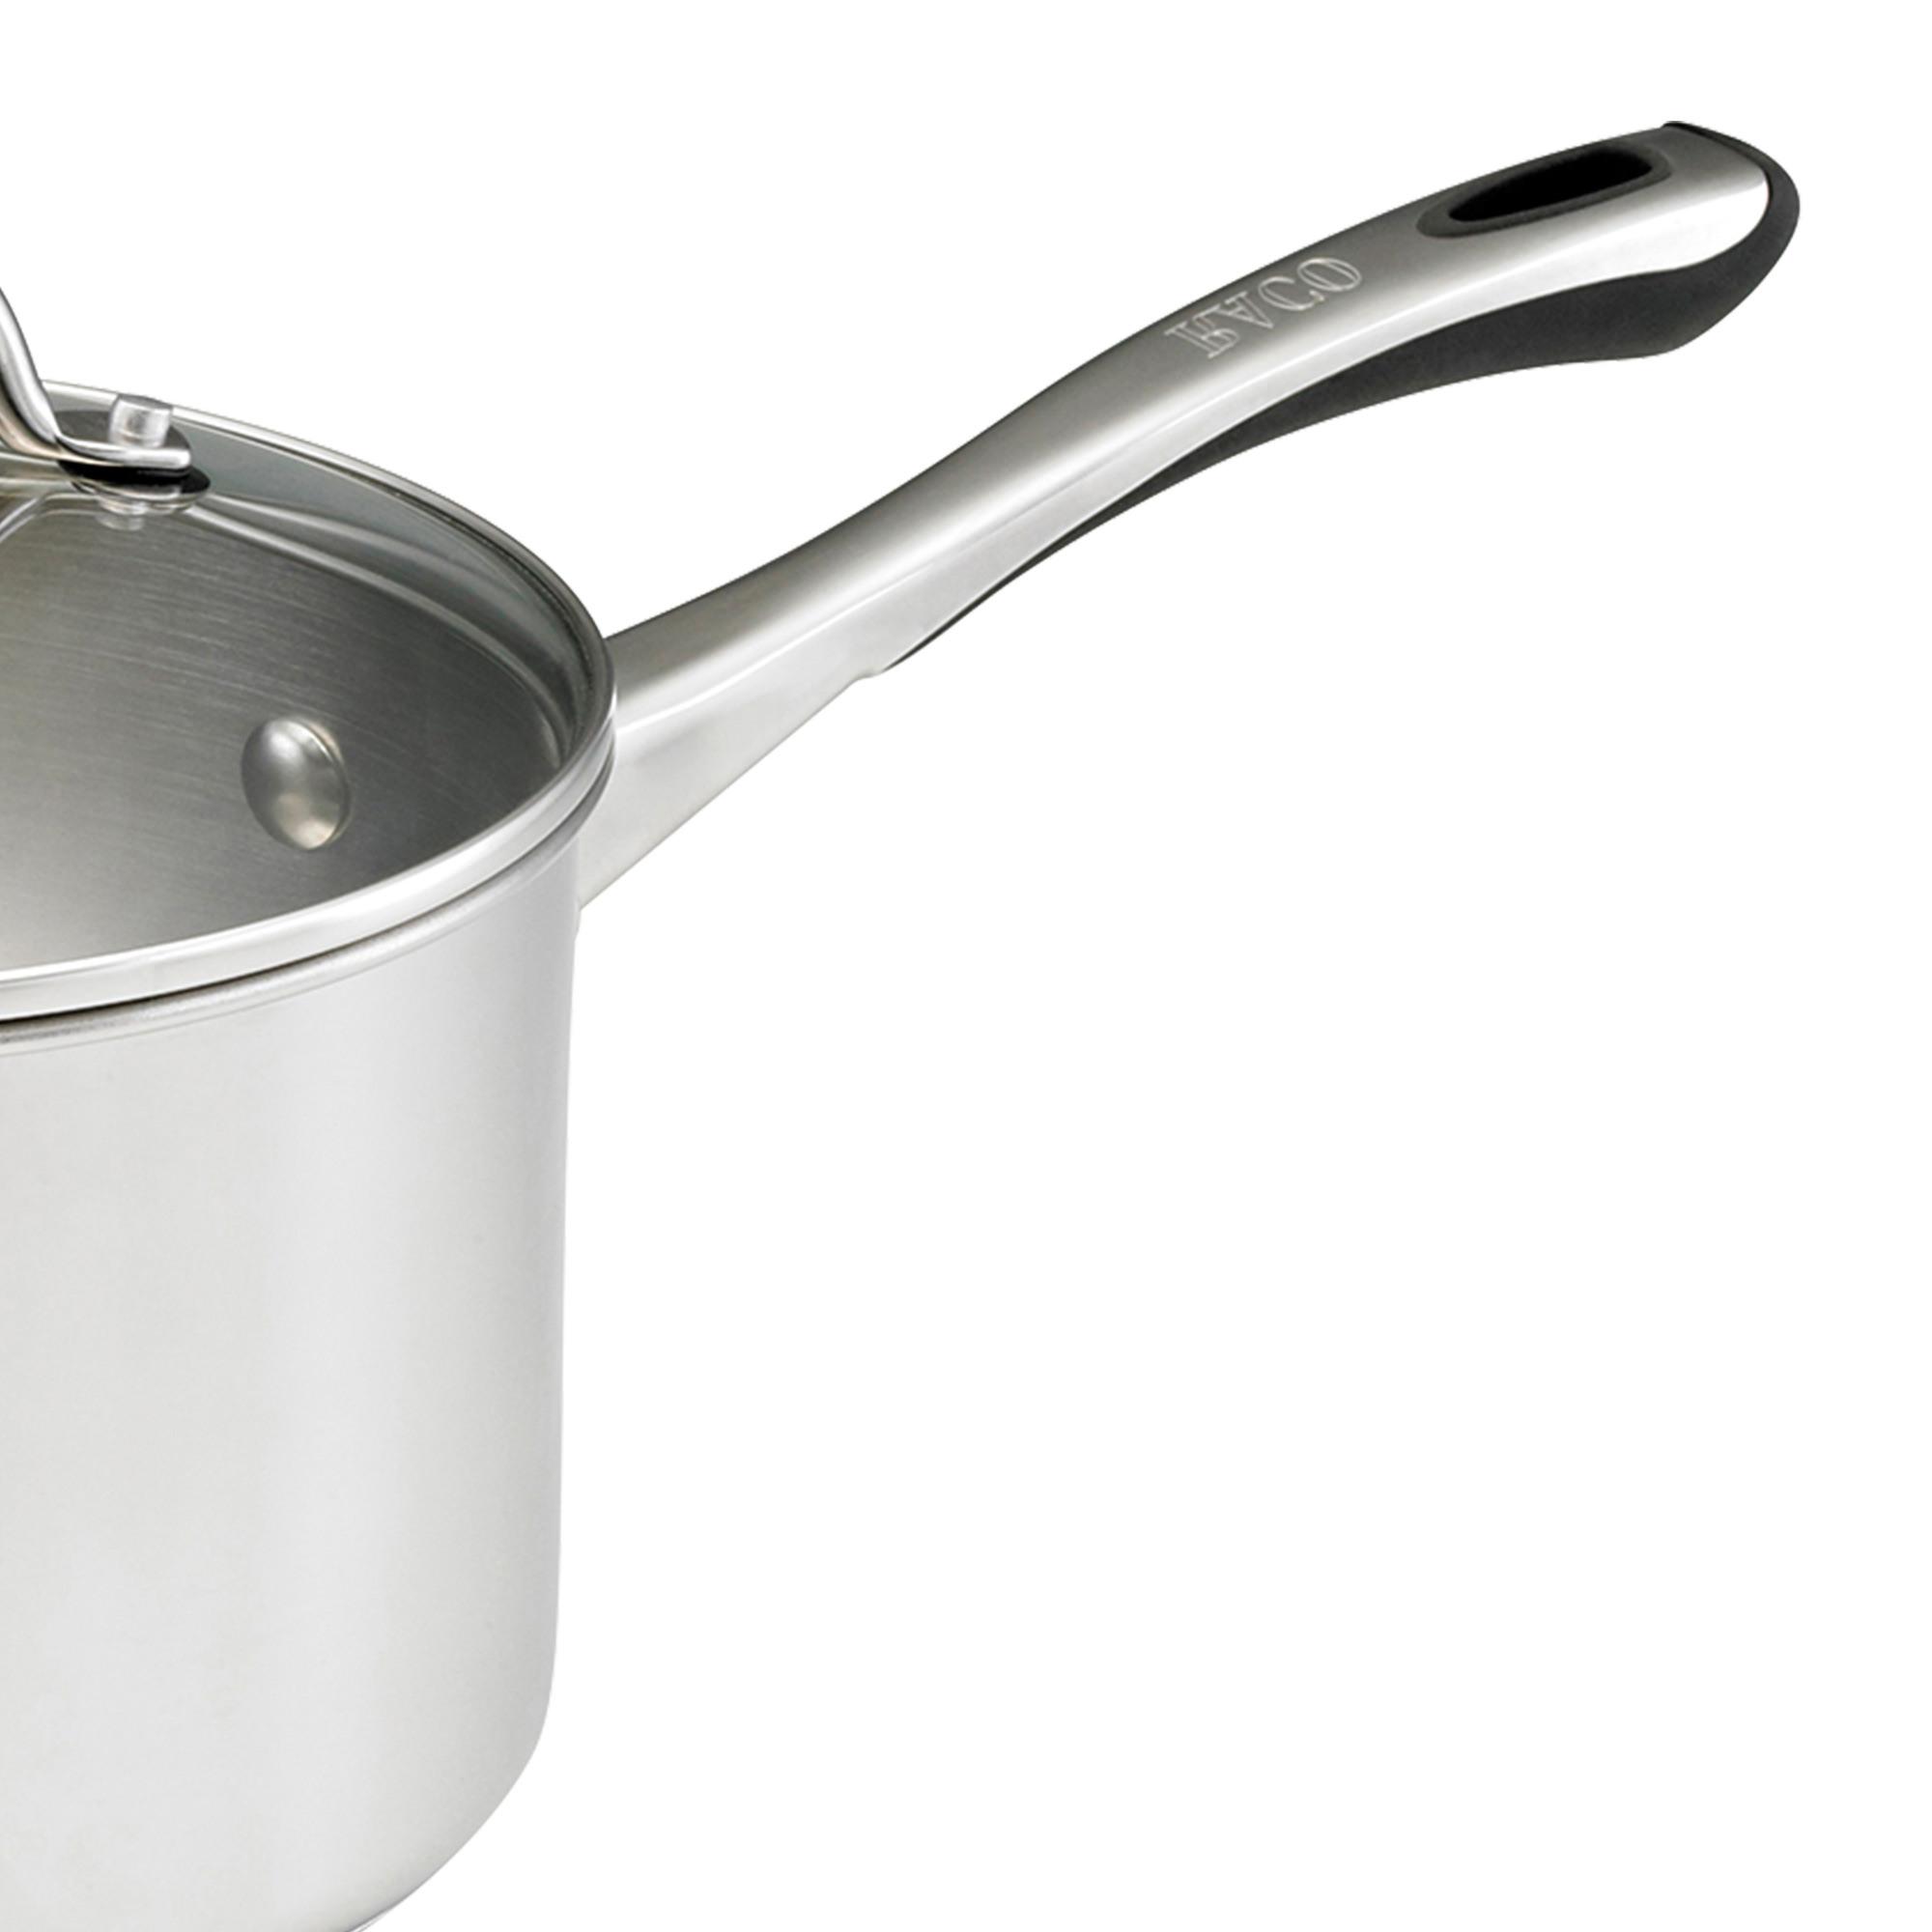 Raco Contemporary Stainless Steel Saucepan 20cm - 3.8L Image 5